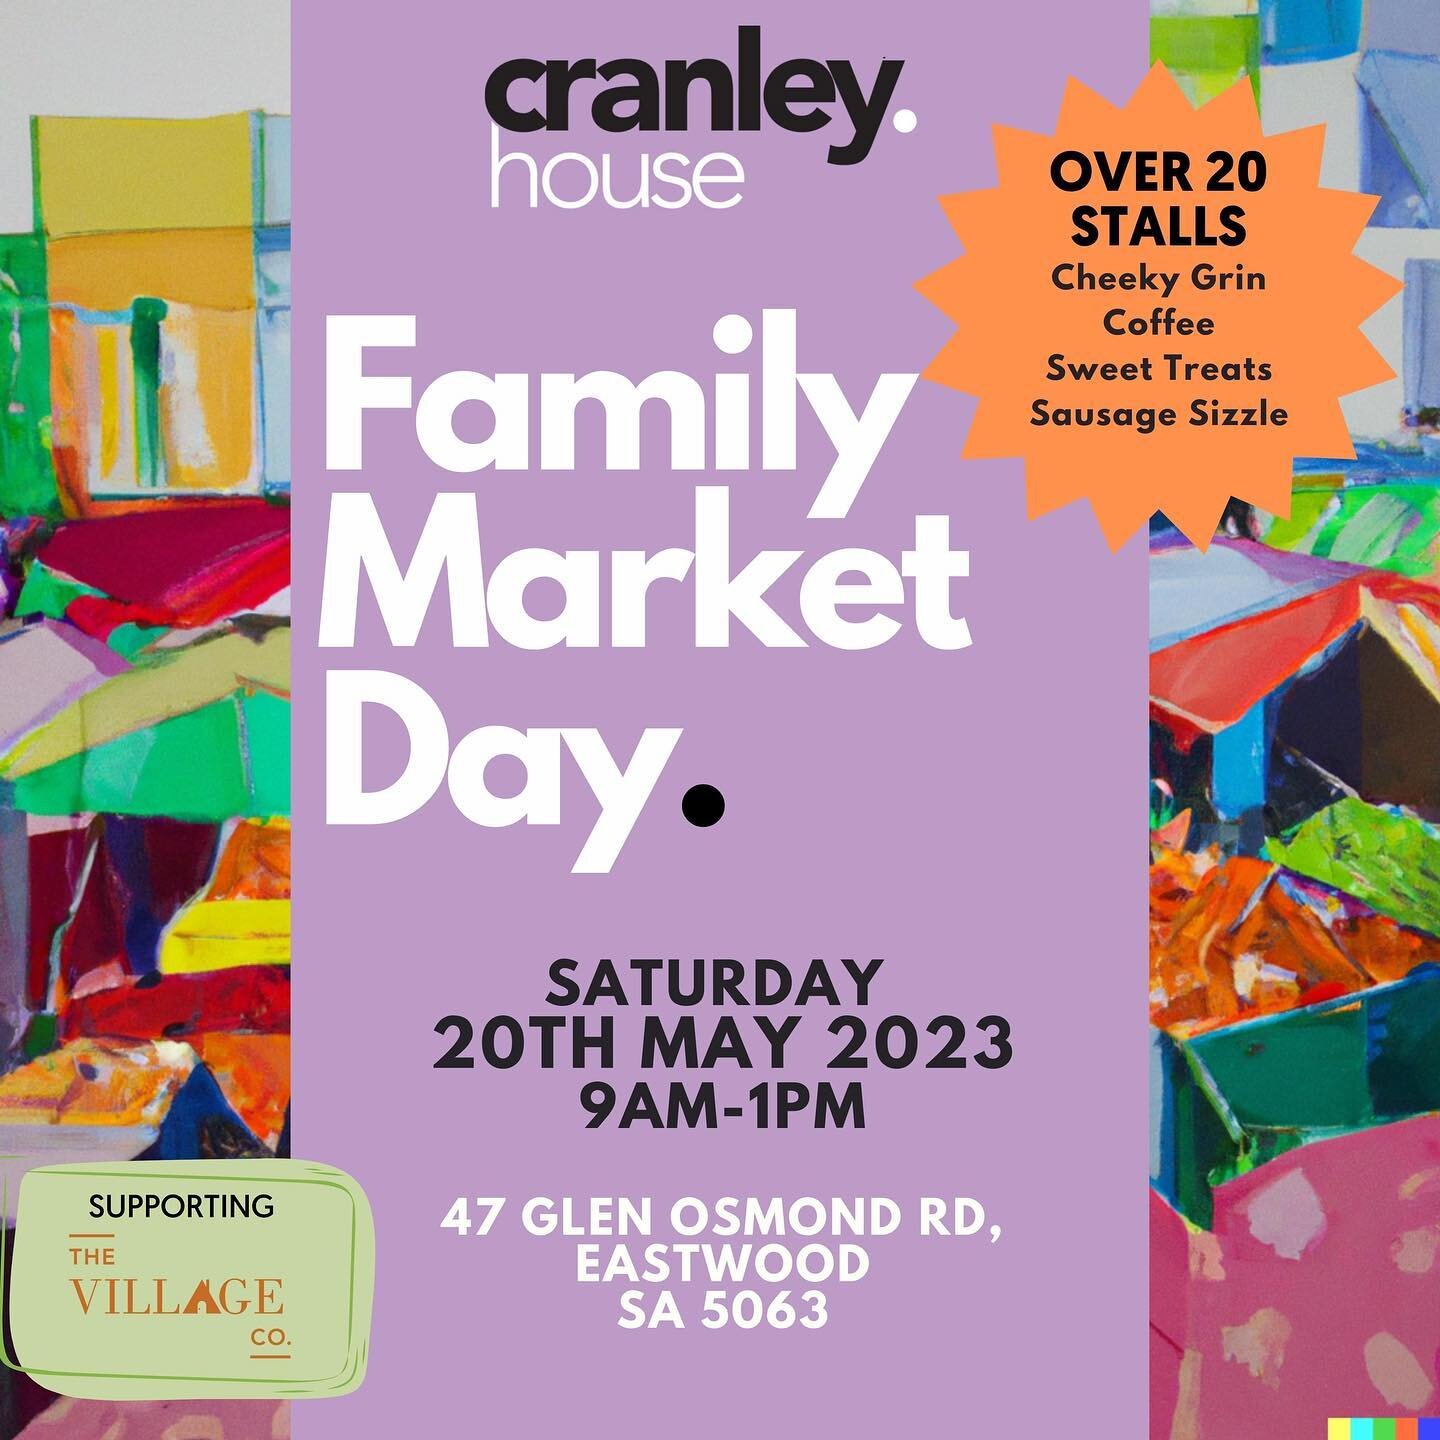 Come along to the Family Market Day at Cranley House, over 20 stalls including coffee, sweets and a sausage sizzle.